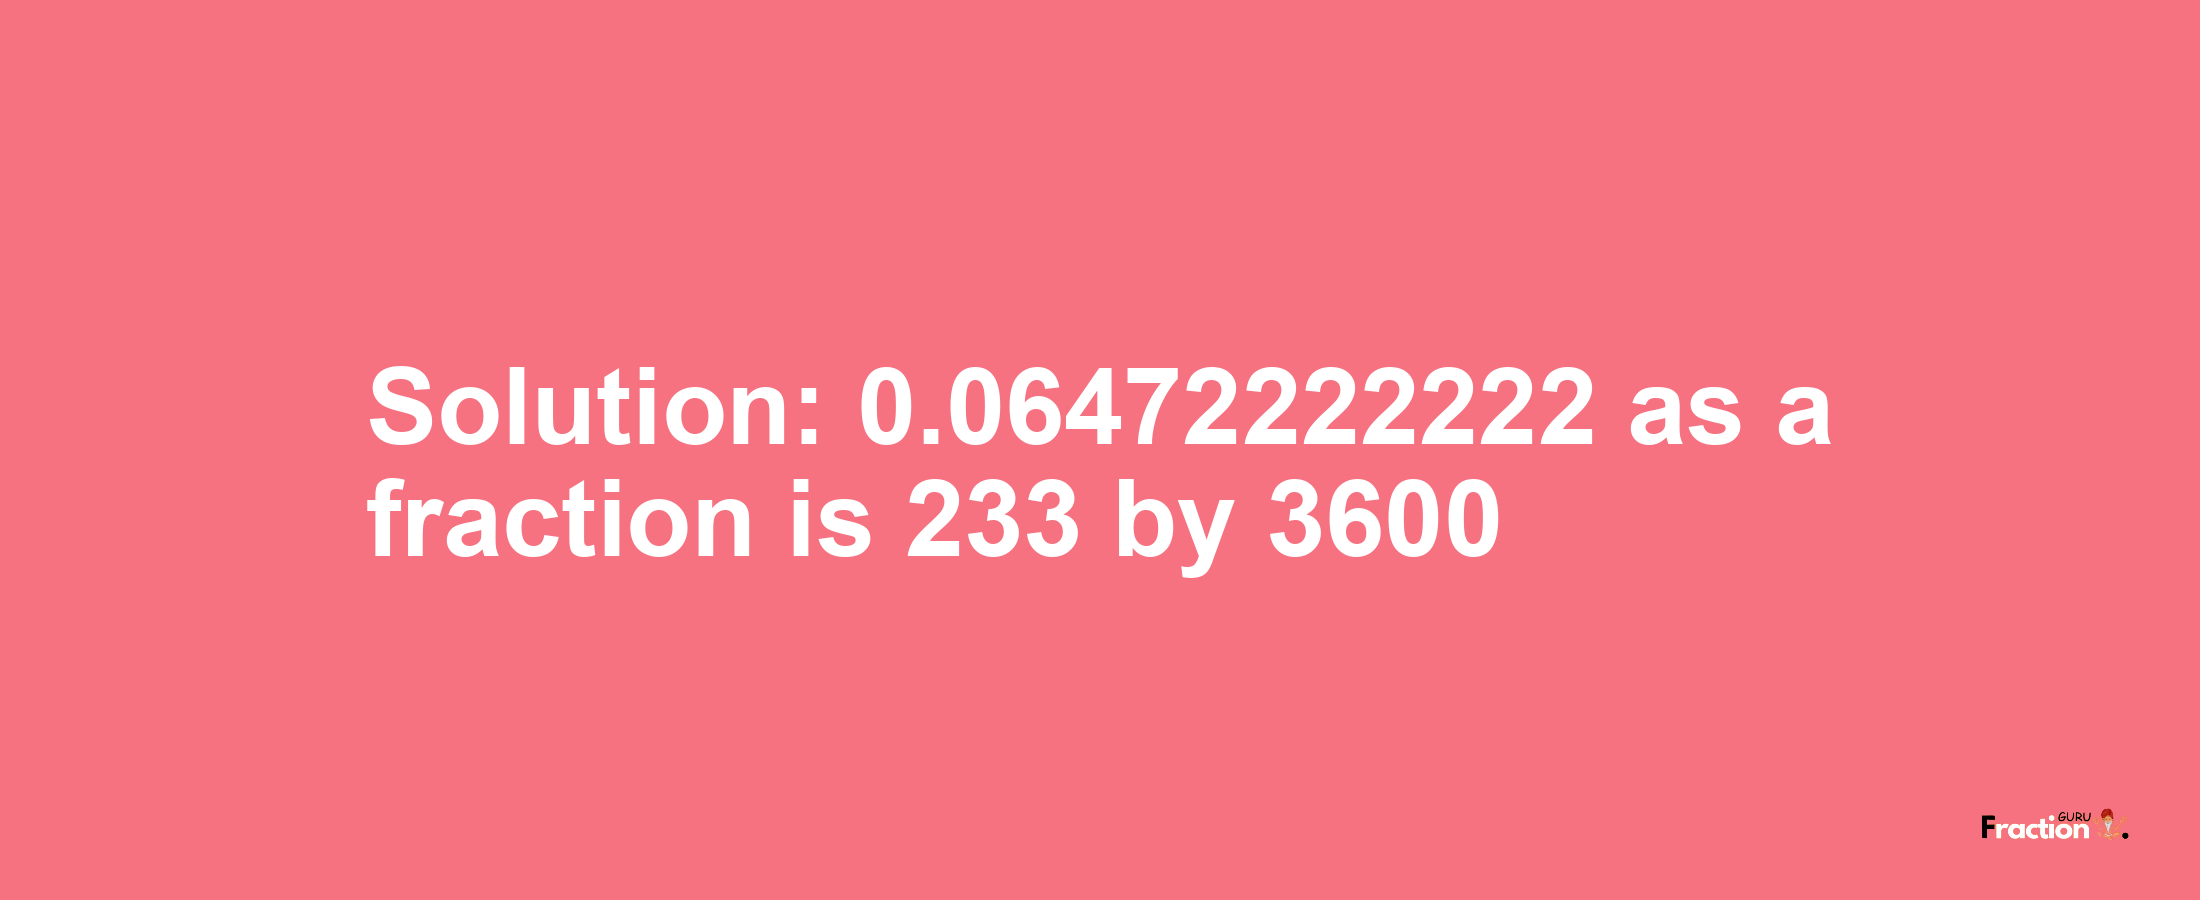 Solution:0.06472222222 as a fraction is 233/3600